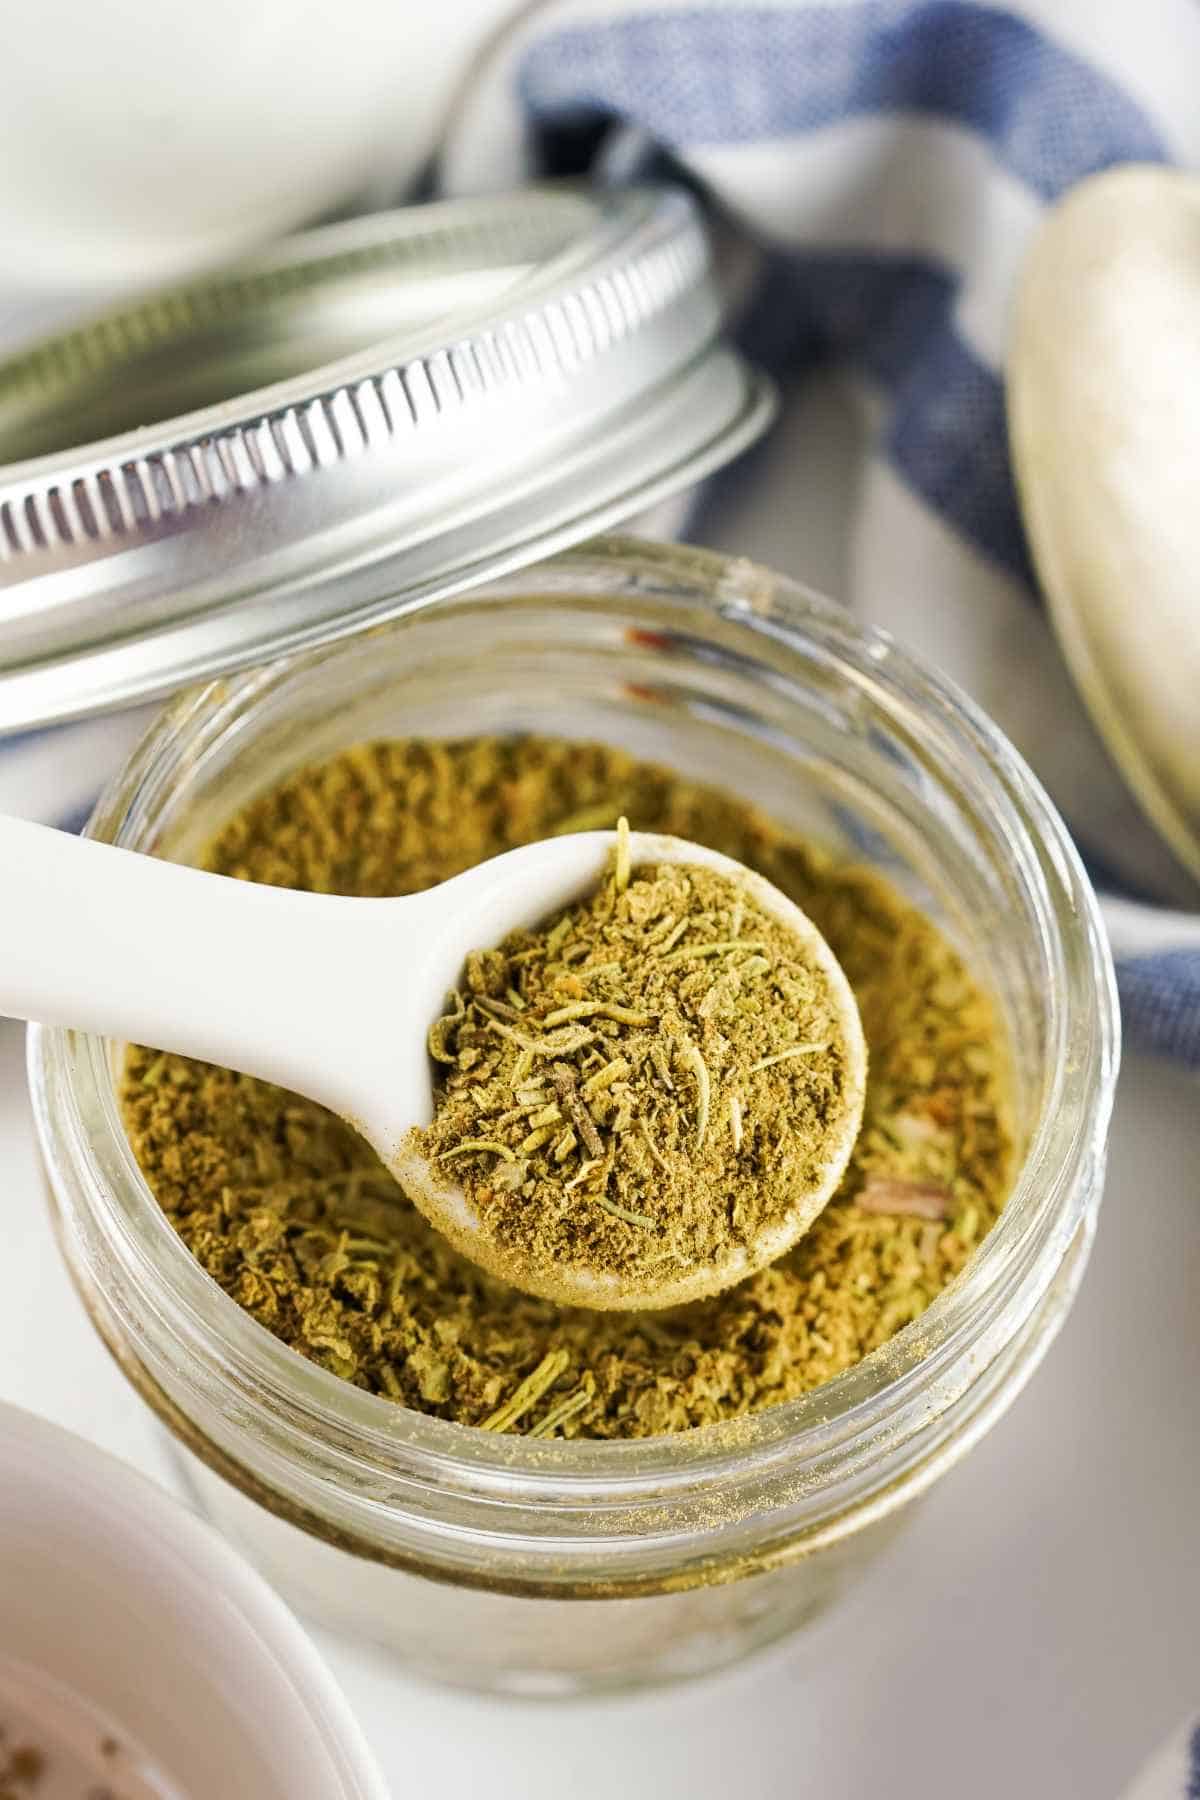 ½ teaspoon measuring spoon filled with homemade blended substitute for poultry seasoning.